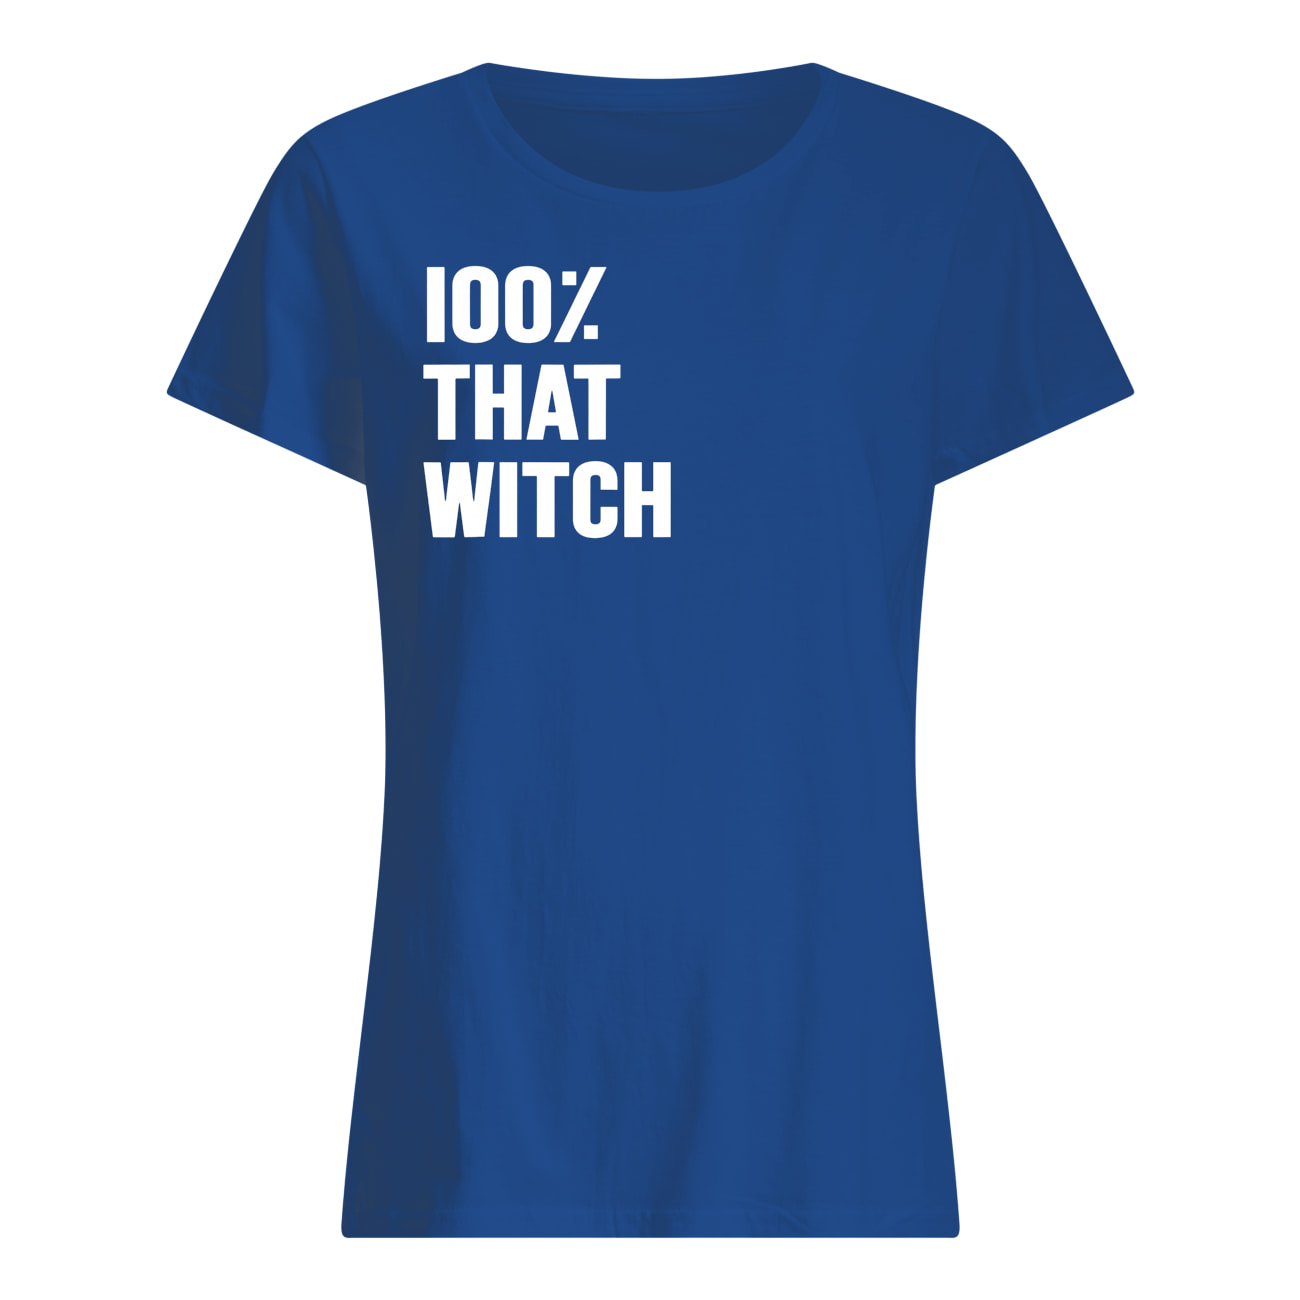 100% that witch womens shirt